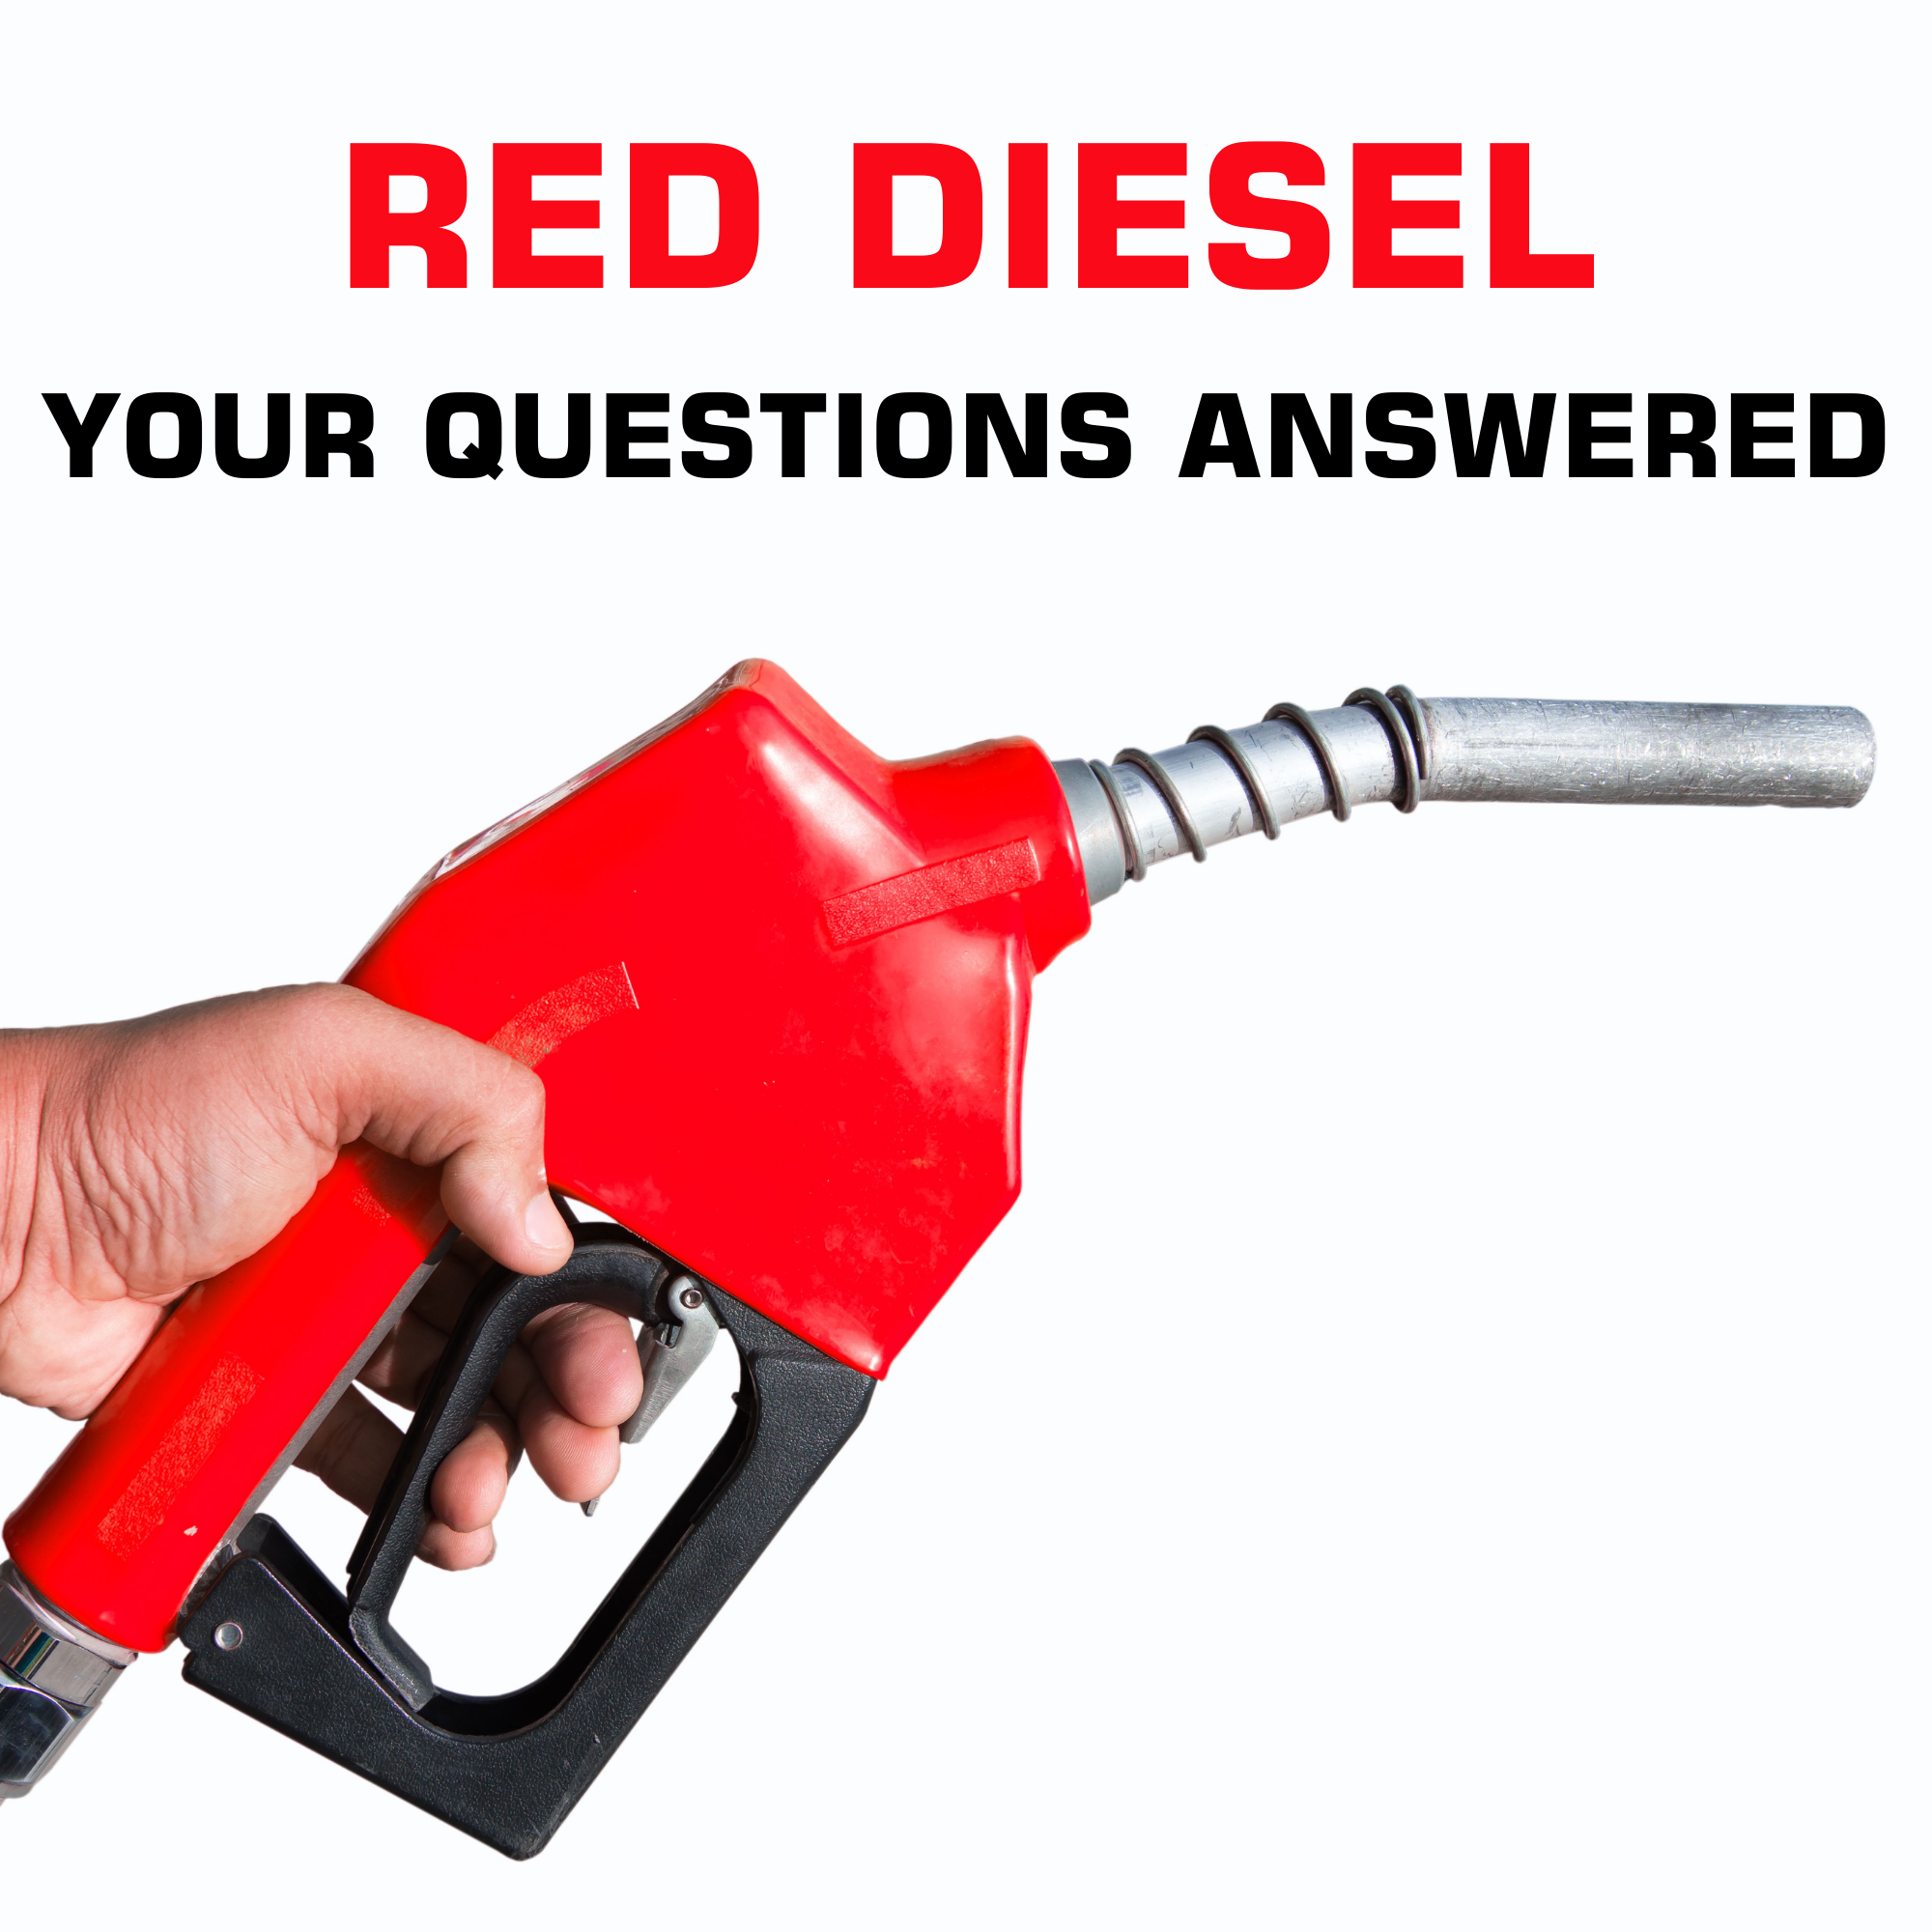 Red diesel - your questions answered